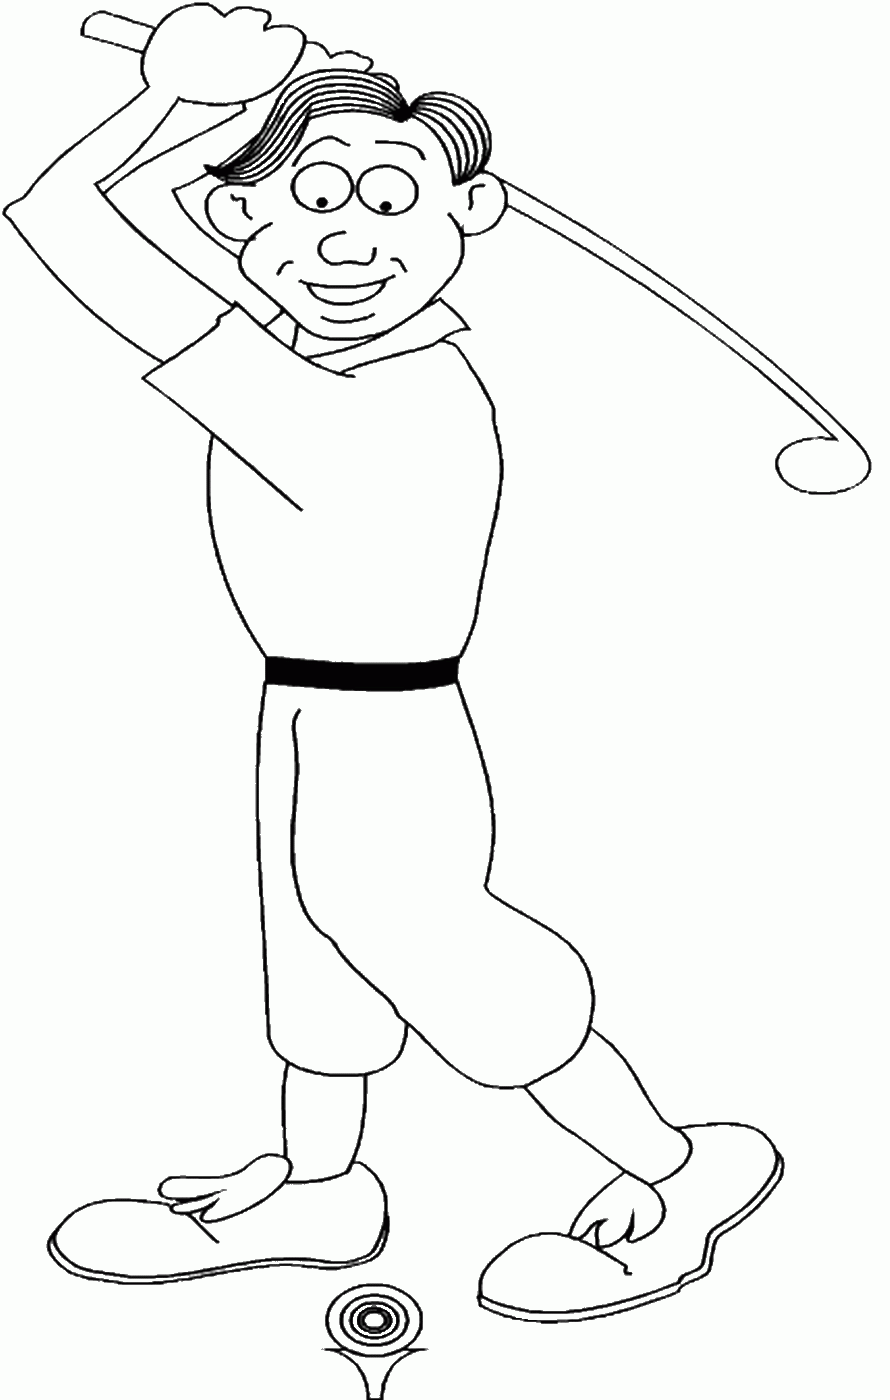 Sports Coloring Pages sports_cl_046 Printable 2021 5790 Coloring4free